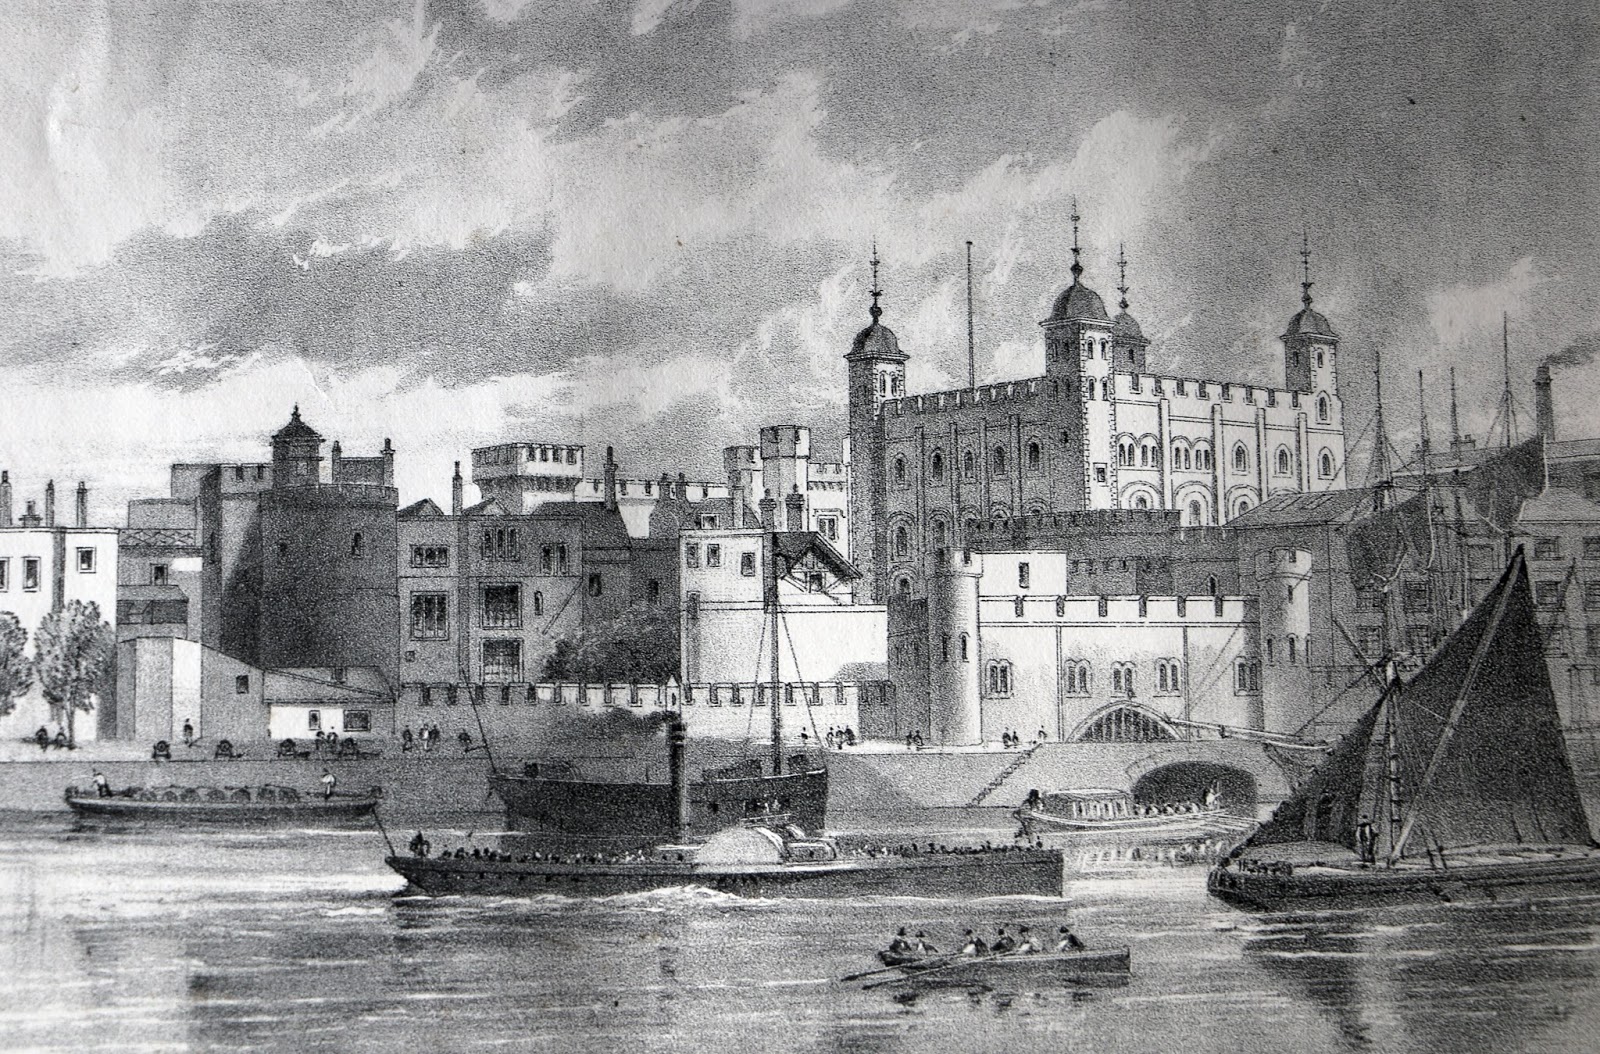 A depiction of the past of Tower of London